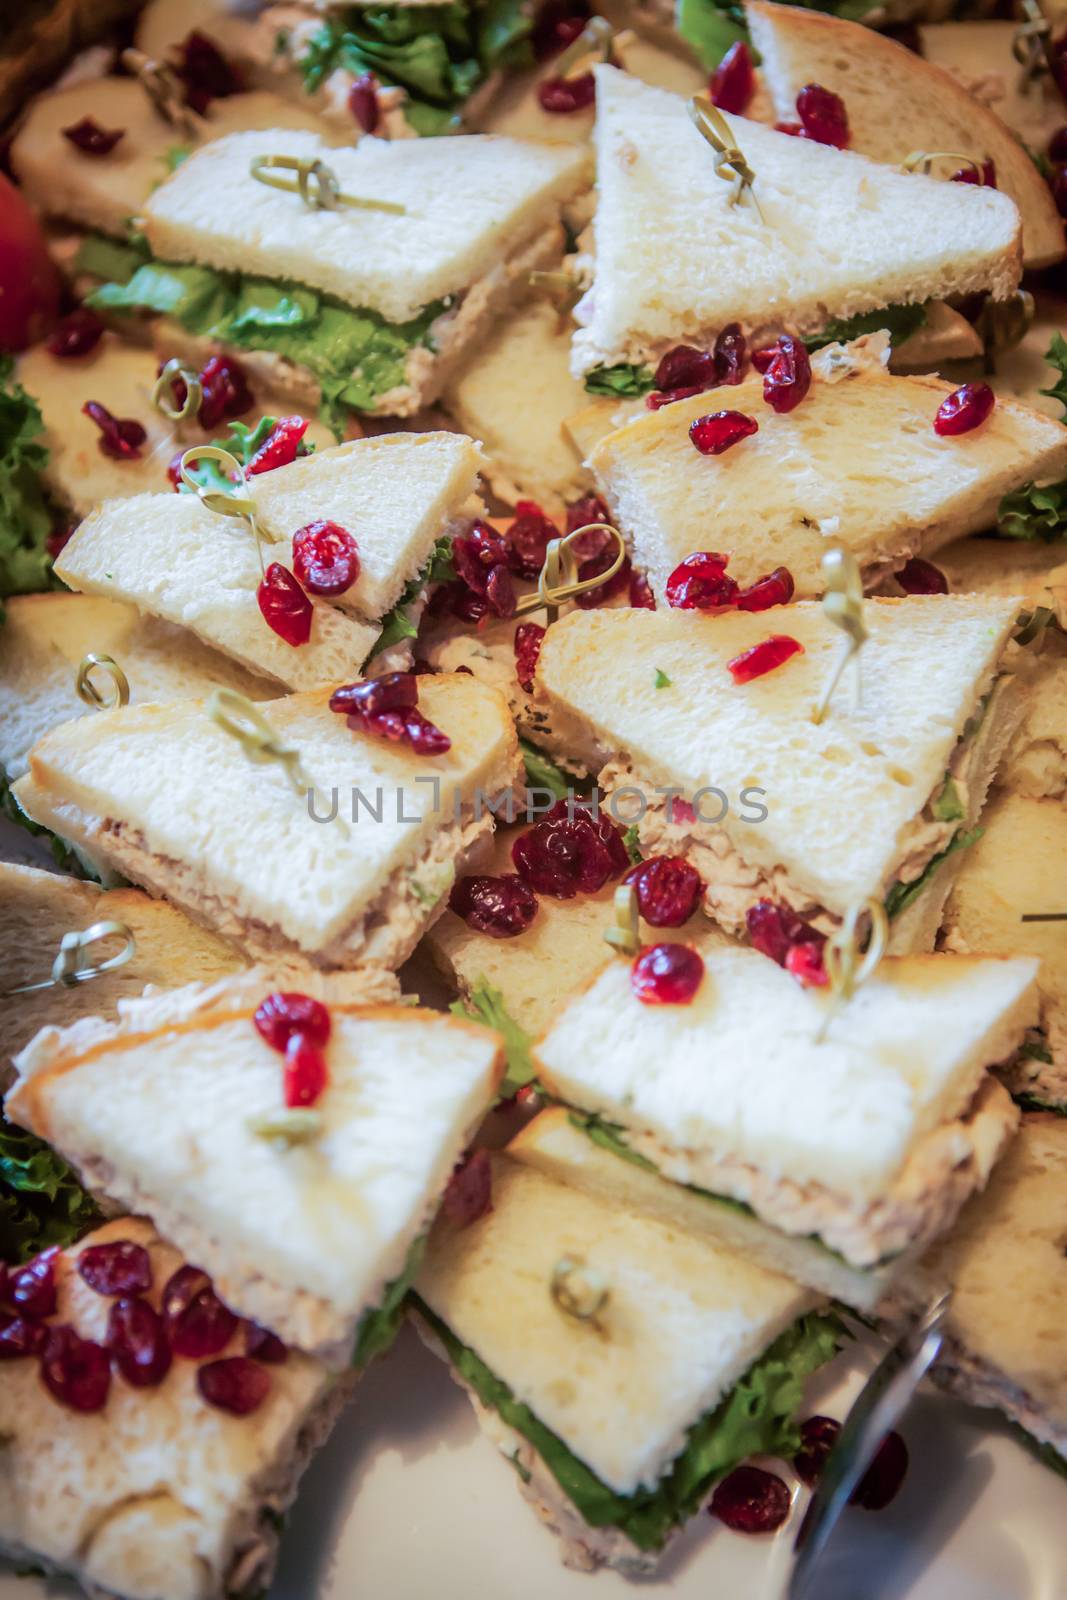 Sandwich triangles nicely laid out with beautiful cranberry garnish.